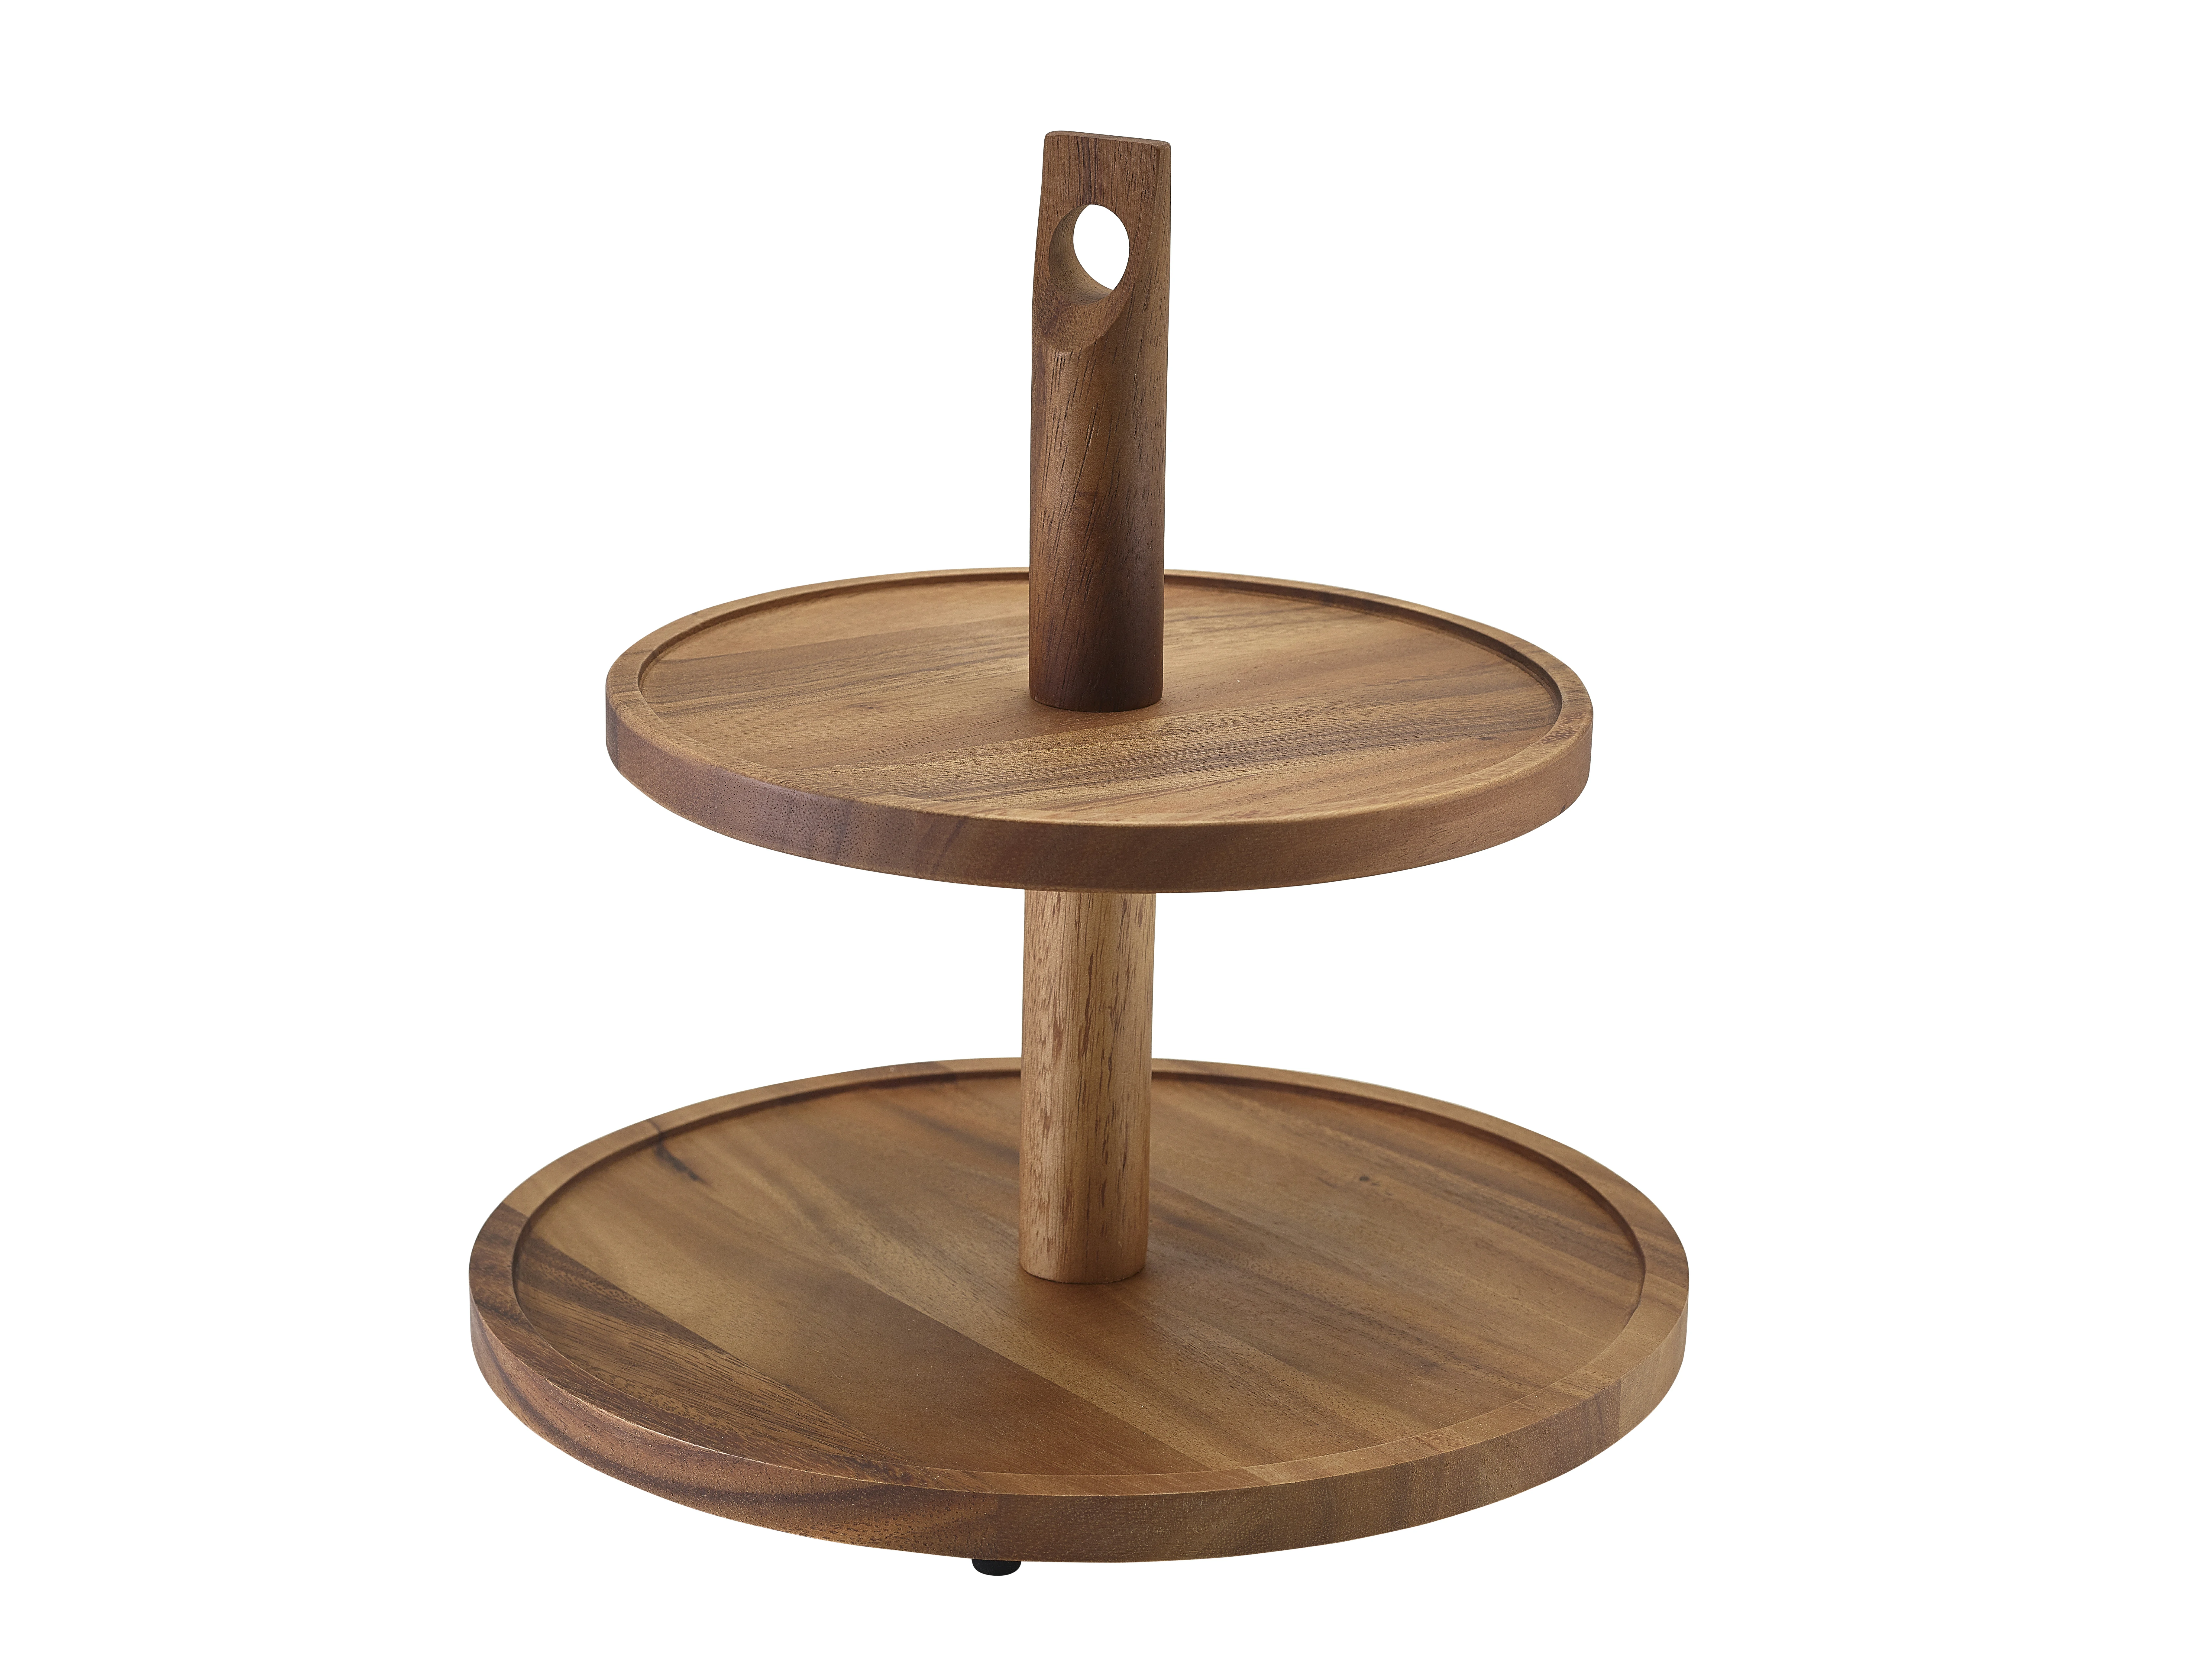 GenWare Acacia Wood Two Tier Cake Stand